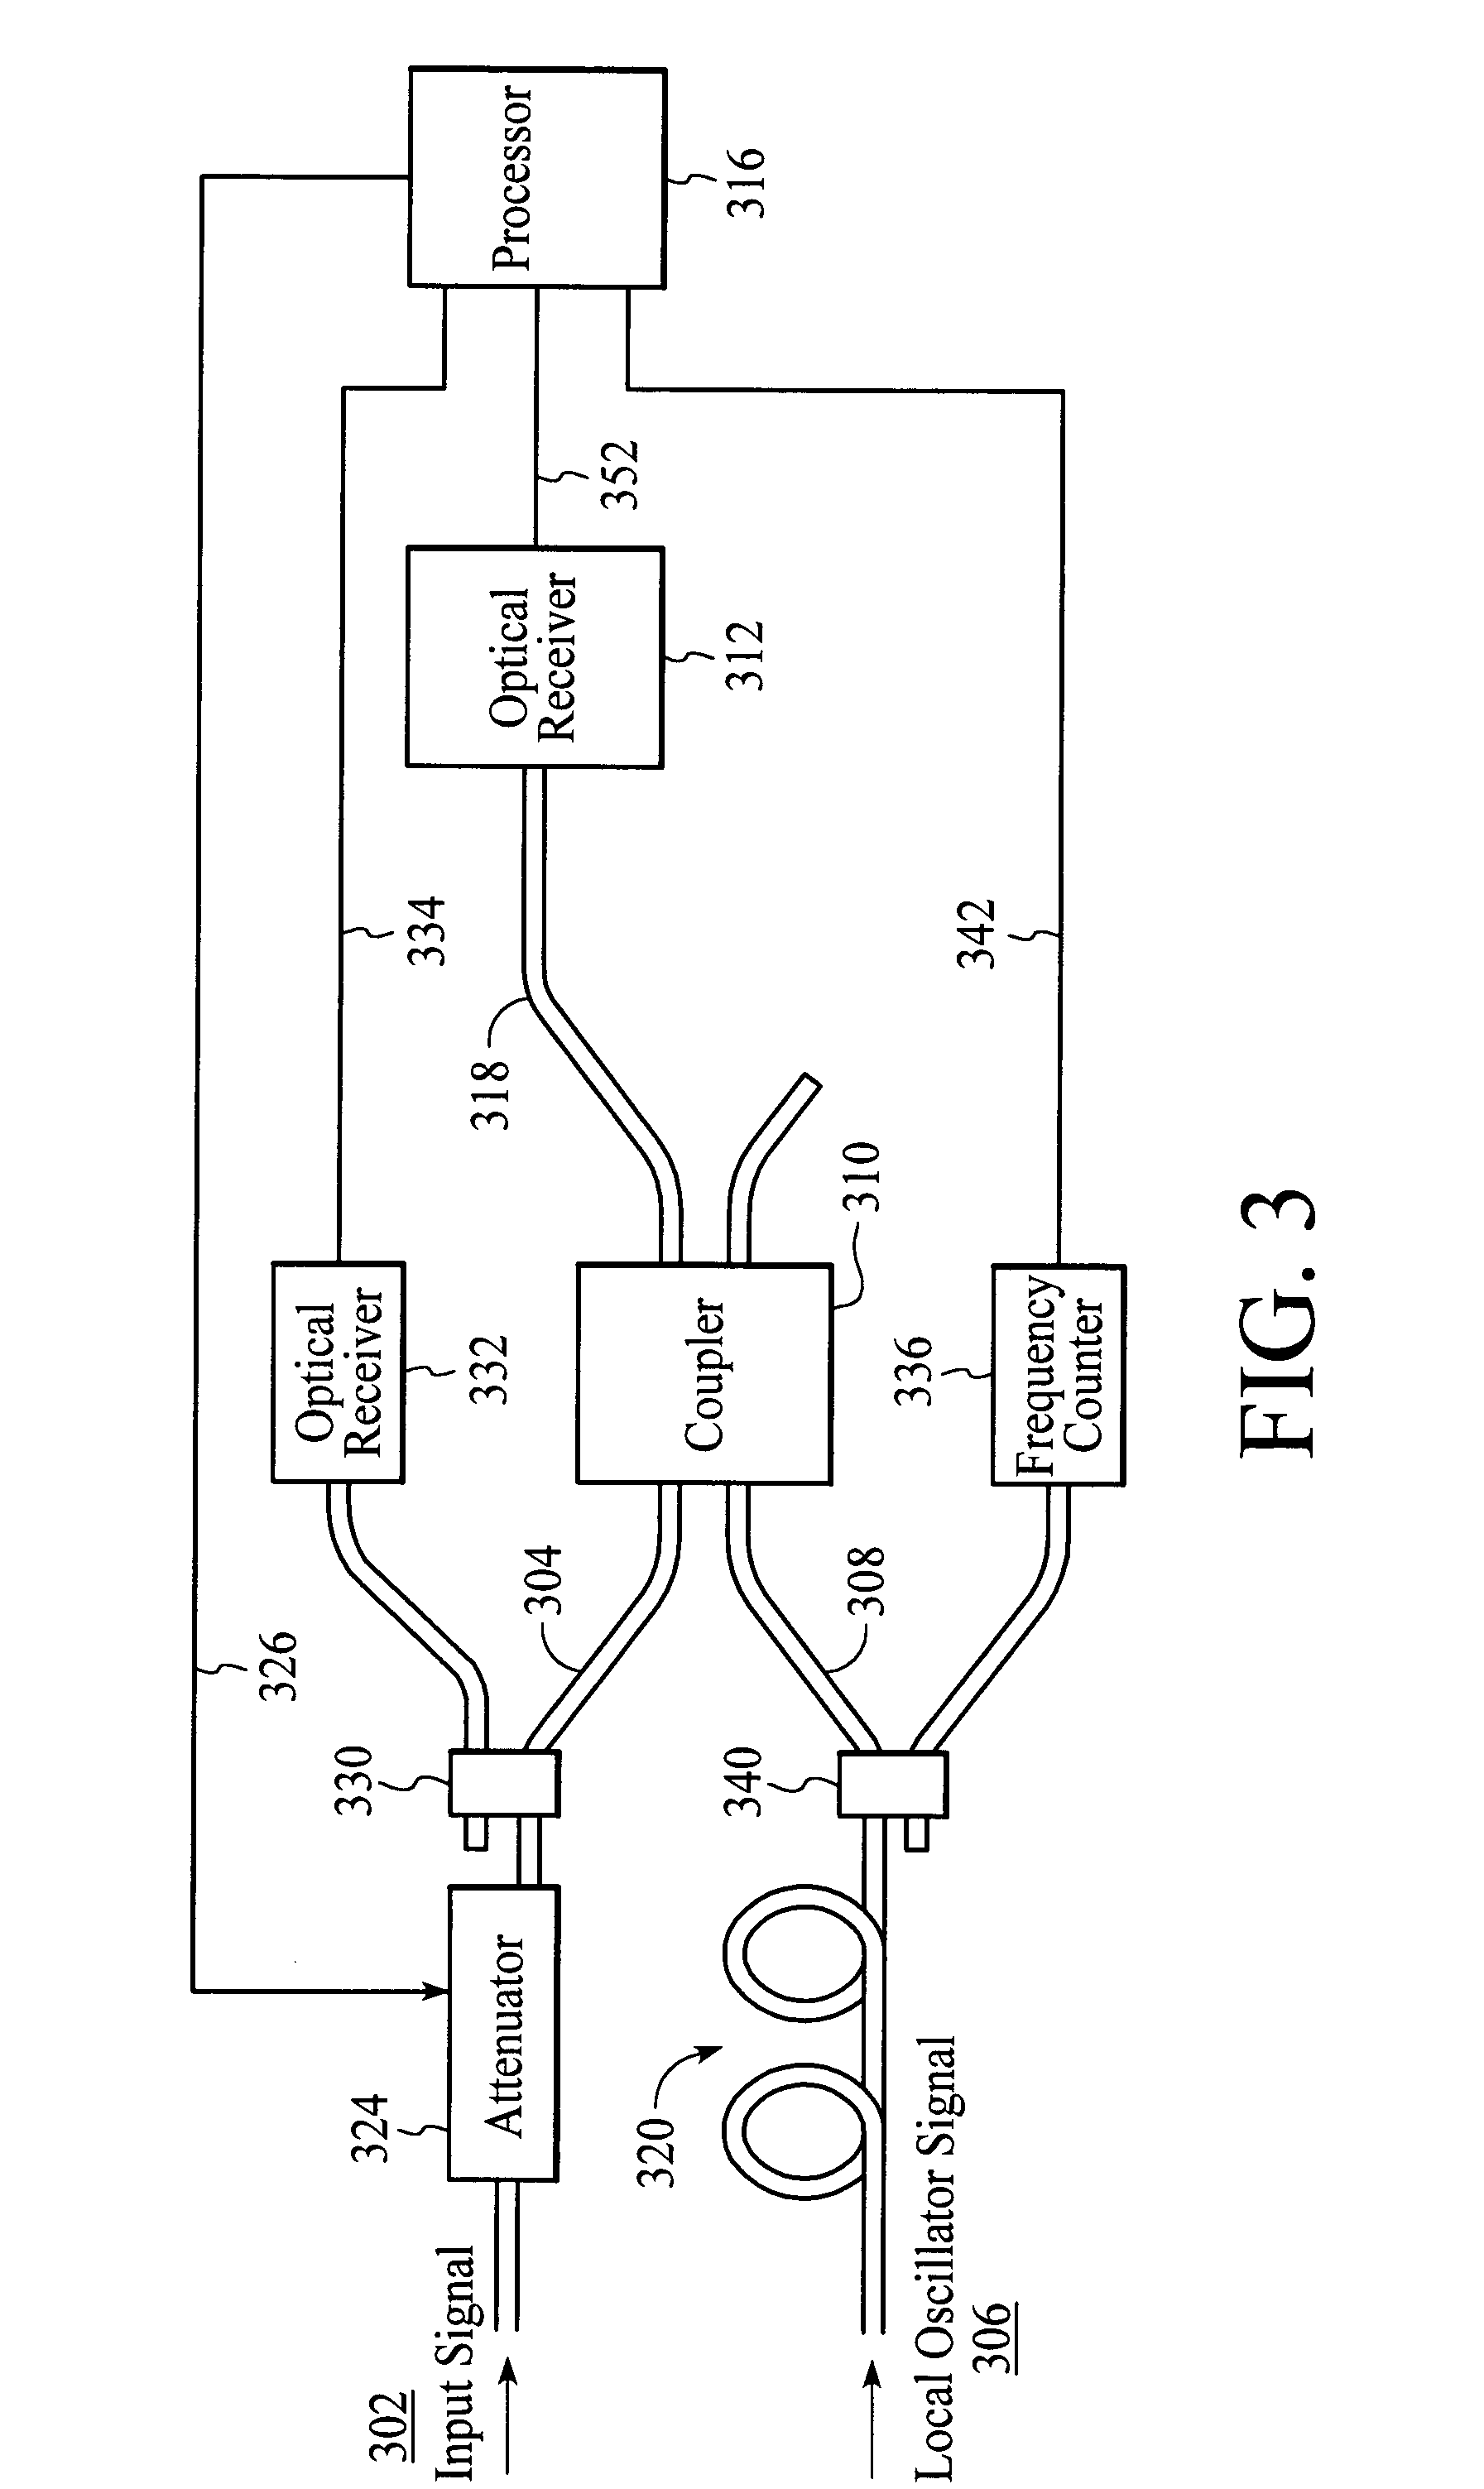 Method and system for optical heterodyne detection of an optical signal that utilizes optical attenuation